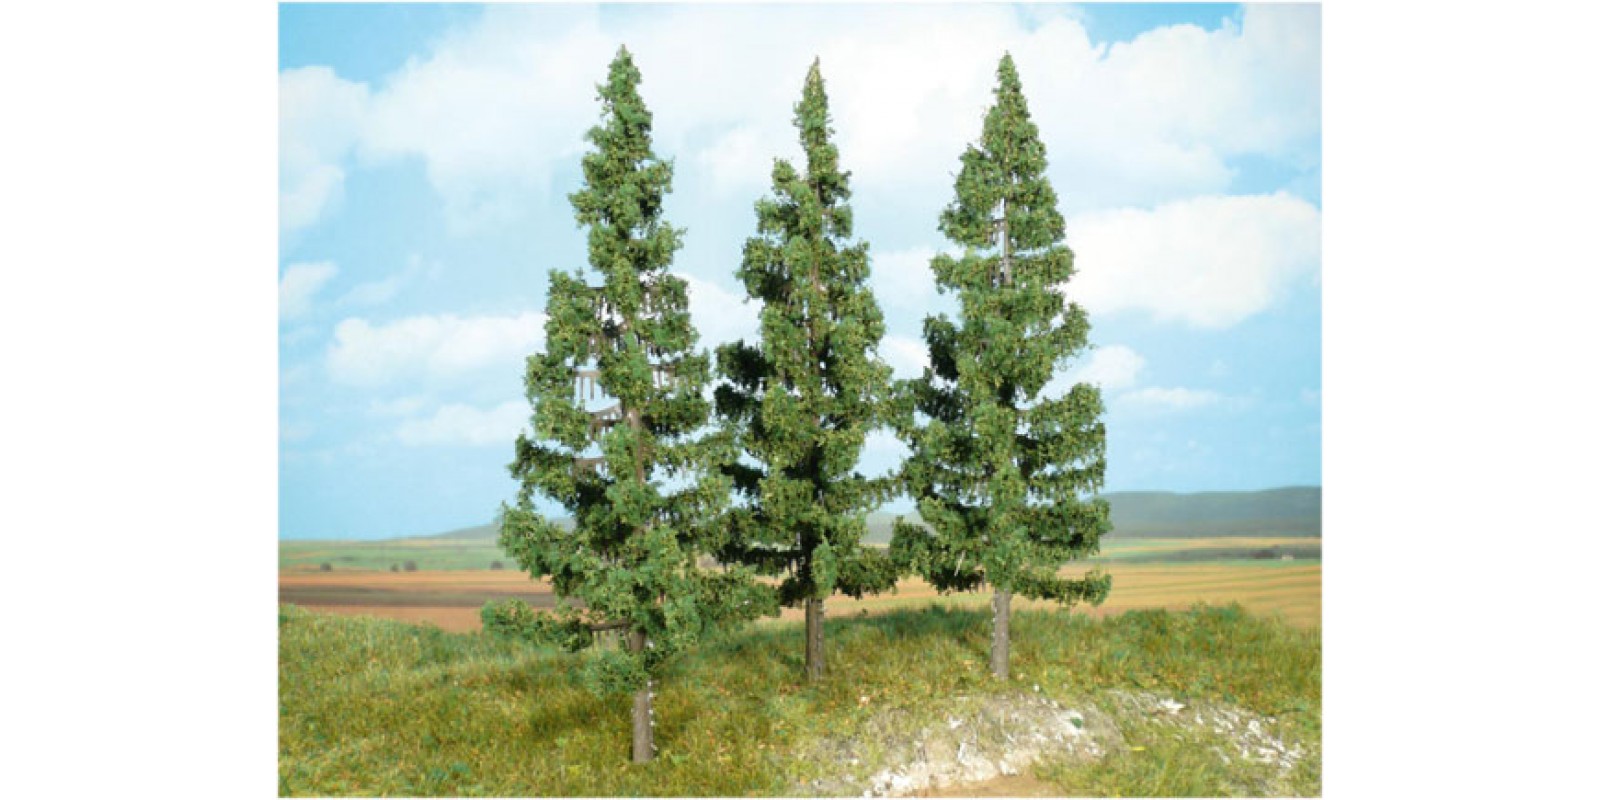 HE2126 3 Spruces, 17cm  